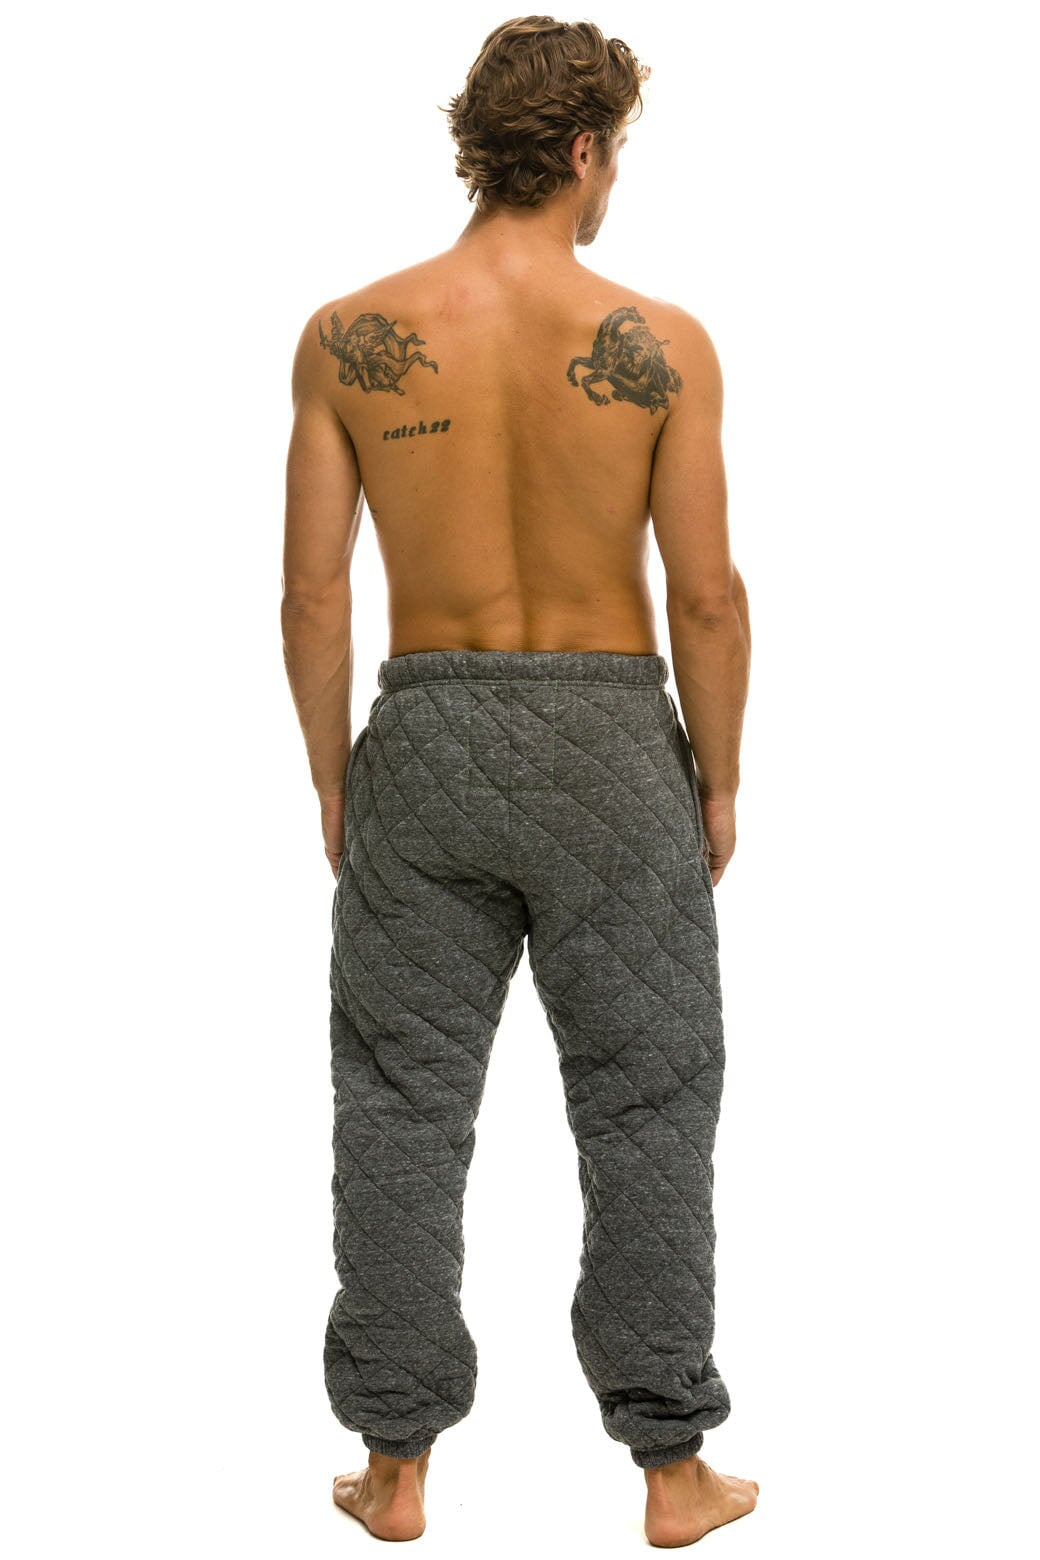 QUILTED SWEATPANTS - HEATHER GREY - Aviator Nation